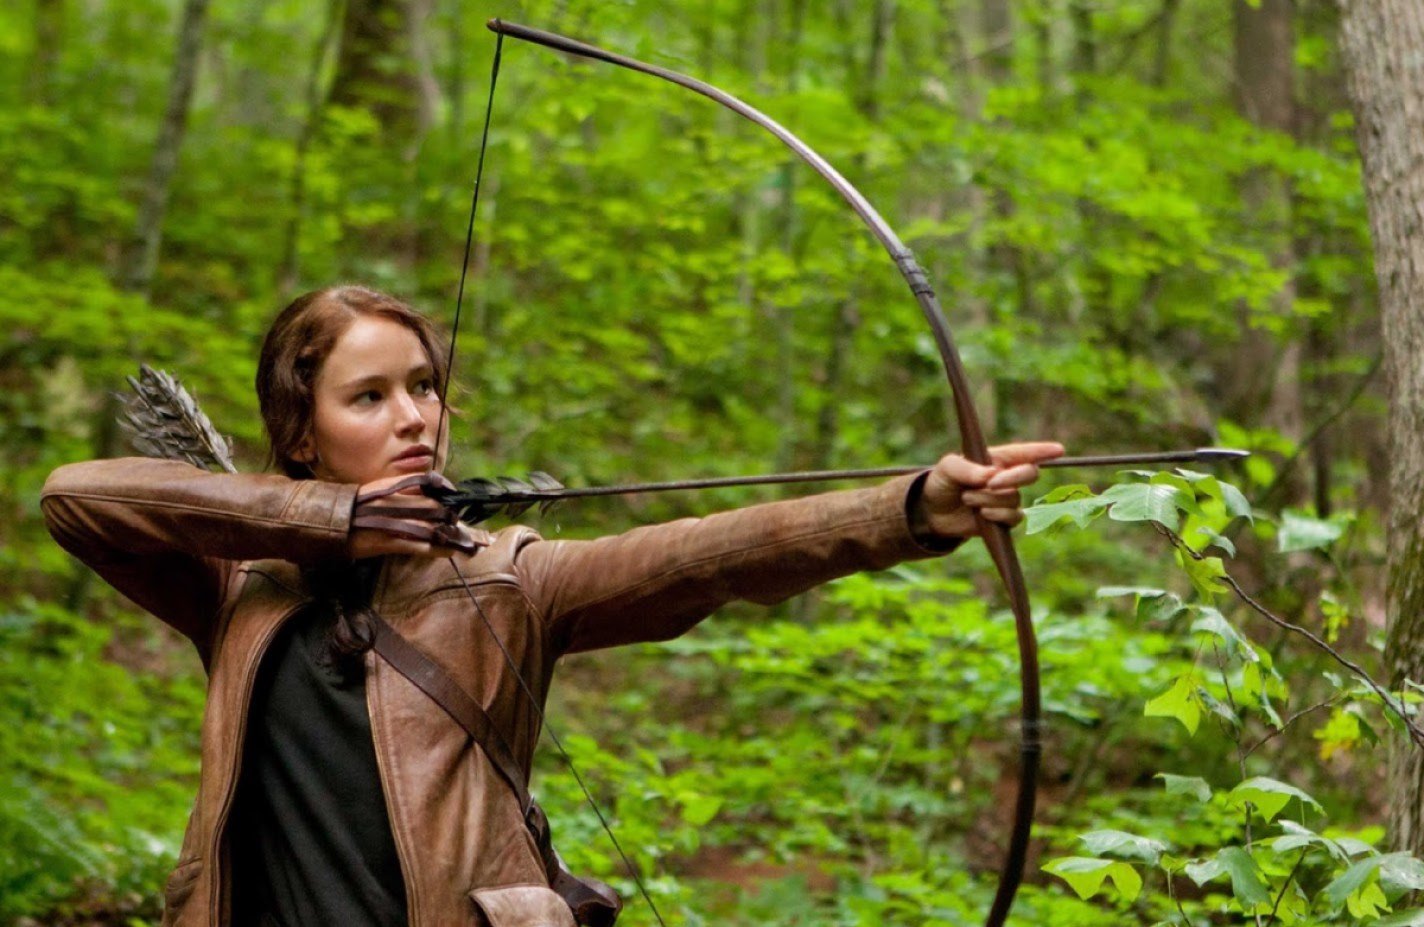 Katniss Everdeen, played by Jennifer Lawrence, hunts in the woods outside of District 12 in the first The Hunger Games movie